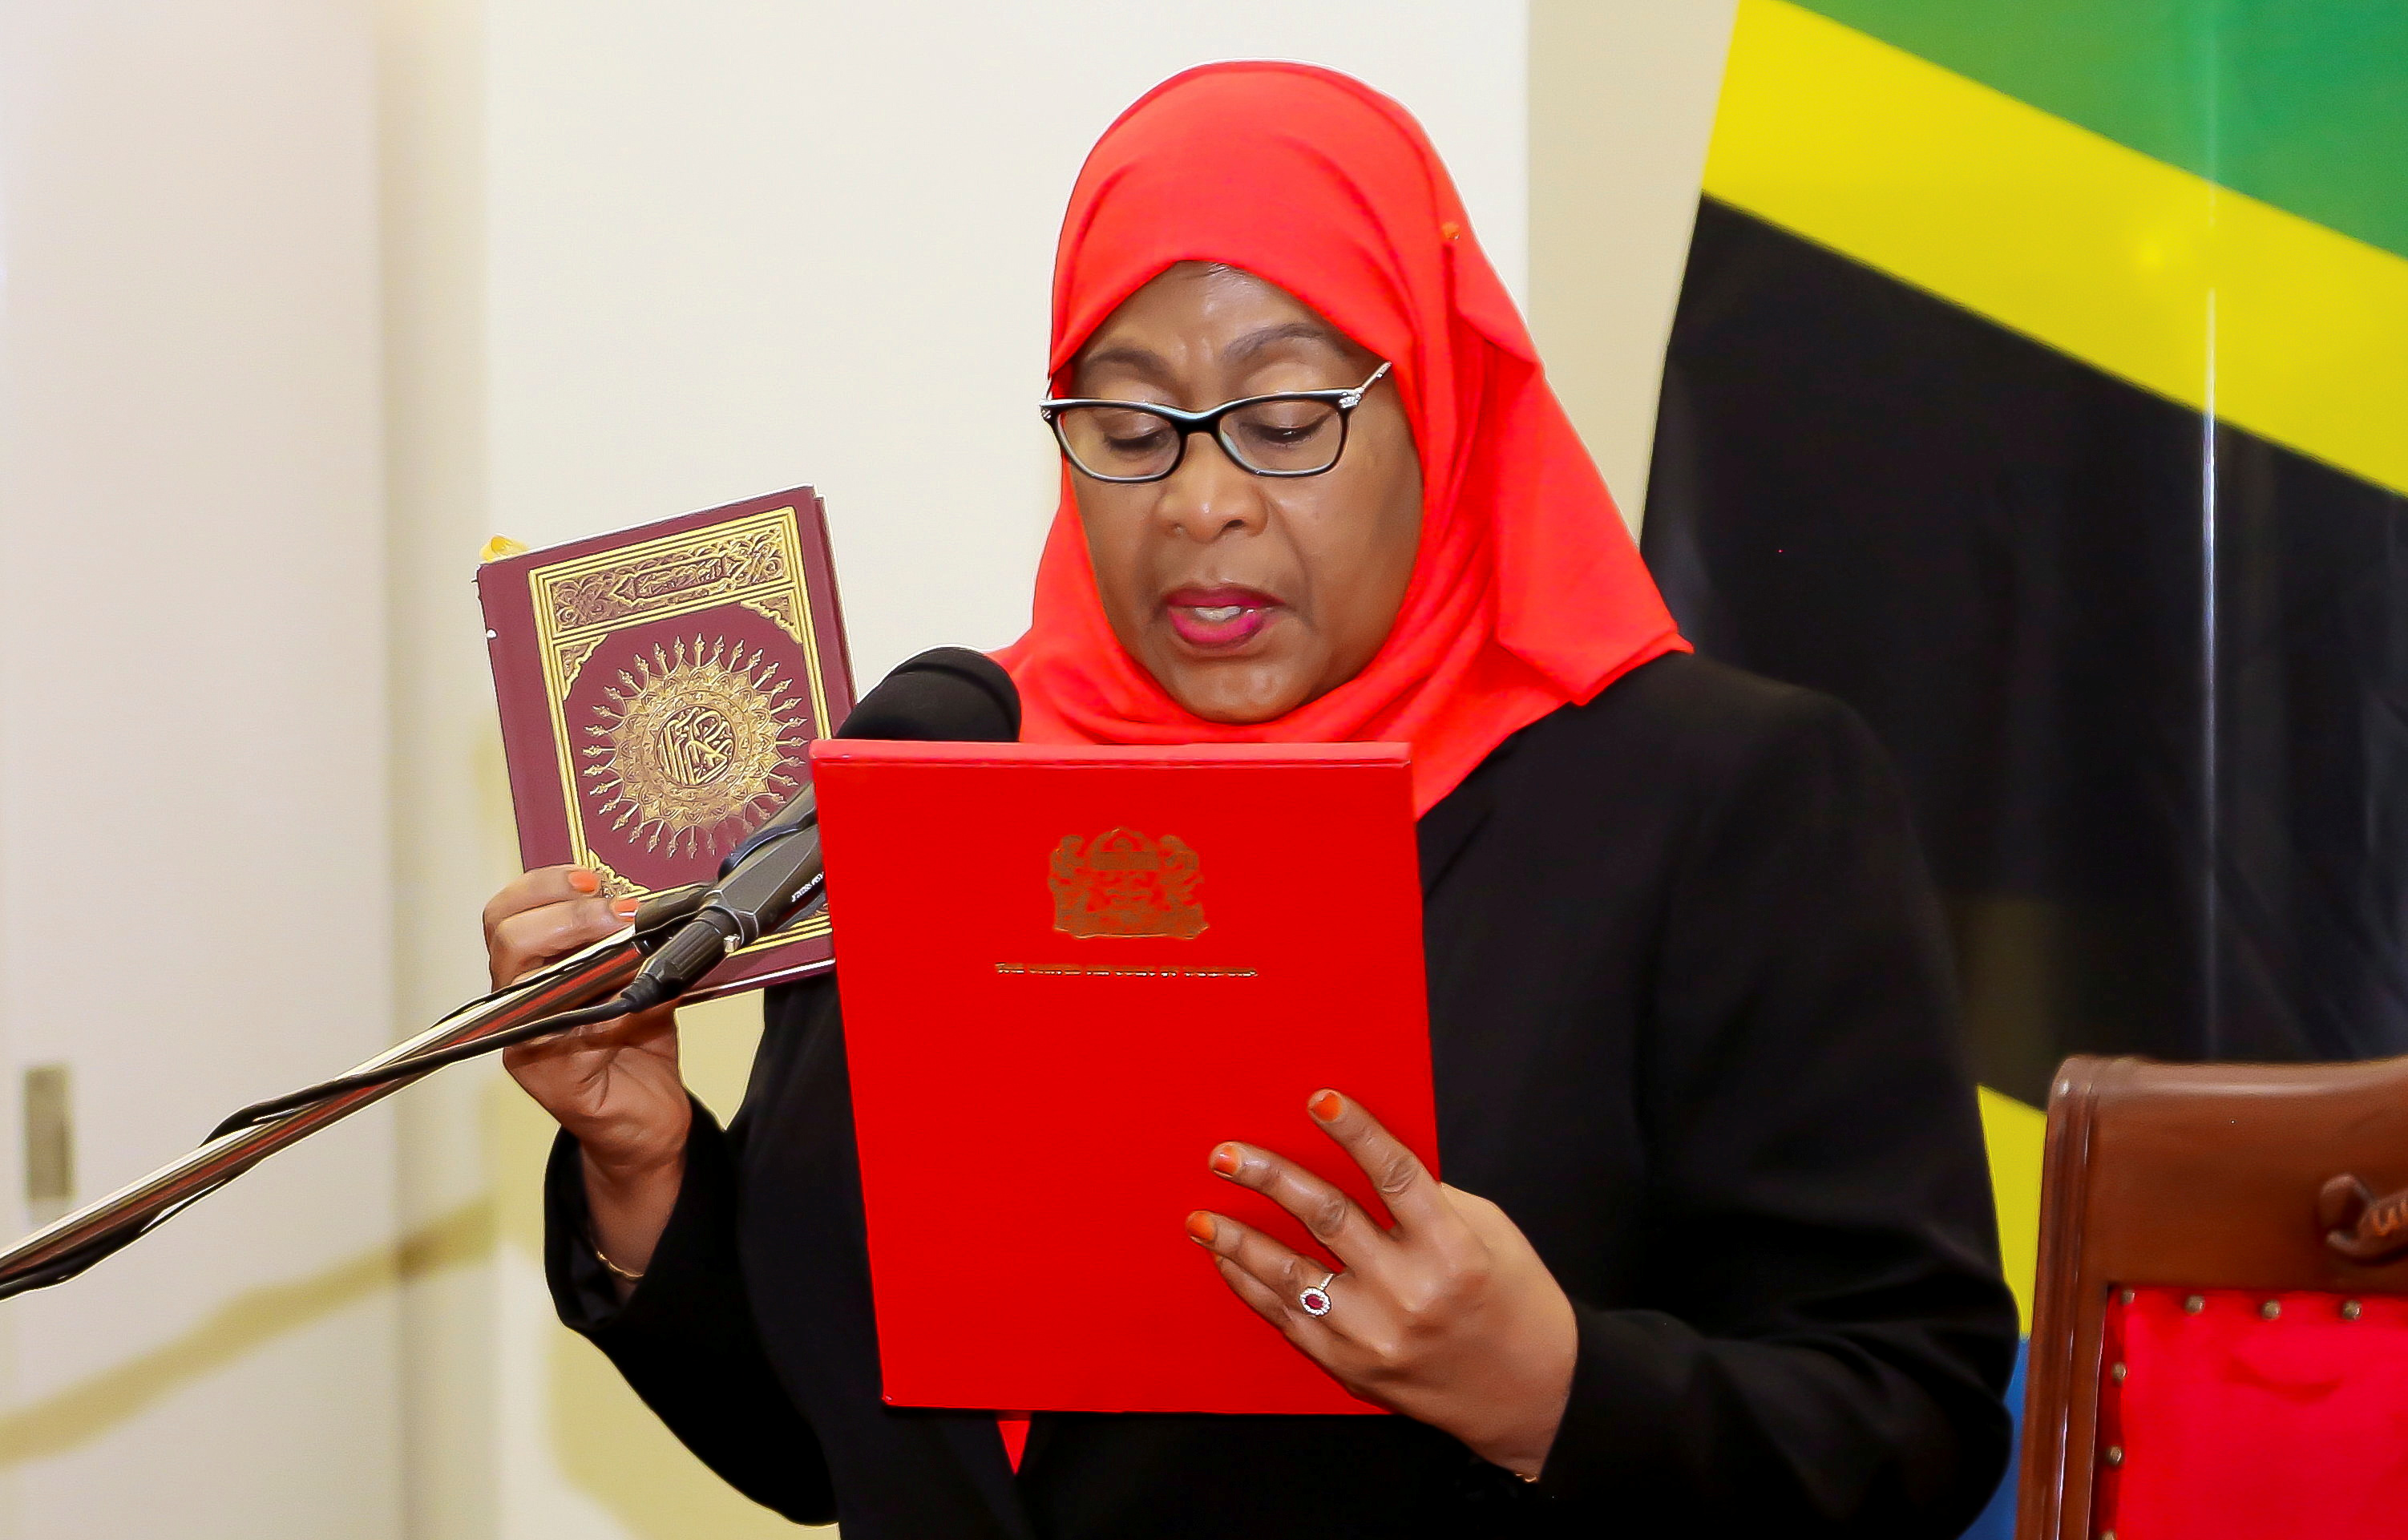 Tanzania's President Samia Suluhu Hassan takes oath of office following the death of her predecessor John Pombe Magufuli at State House in Dar es Salaam